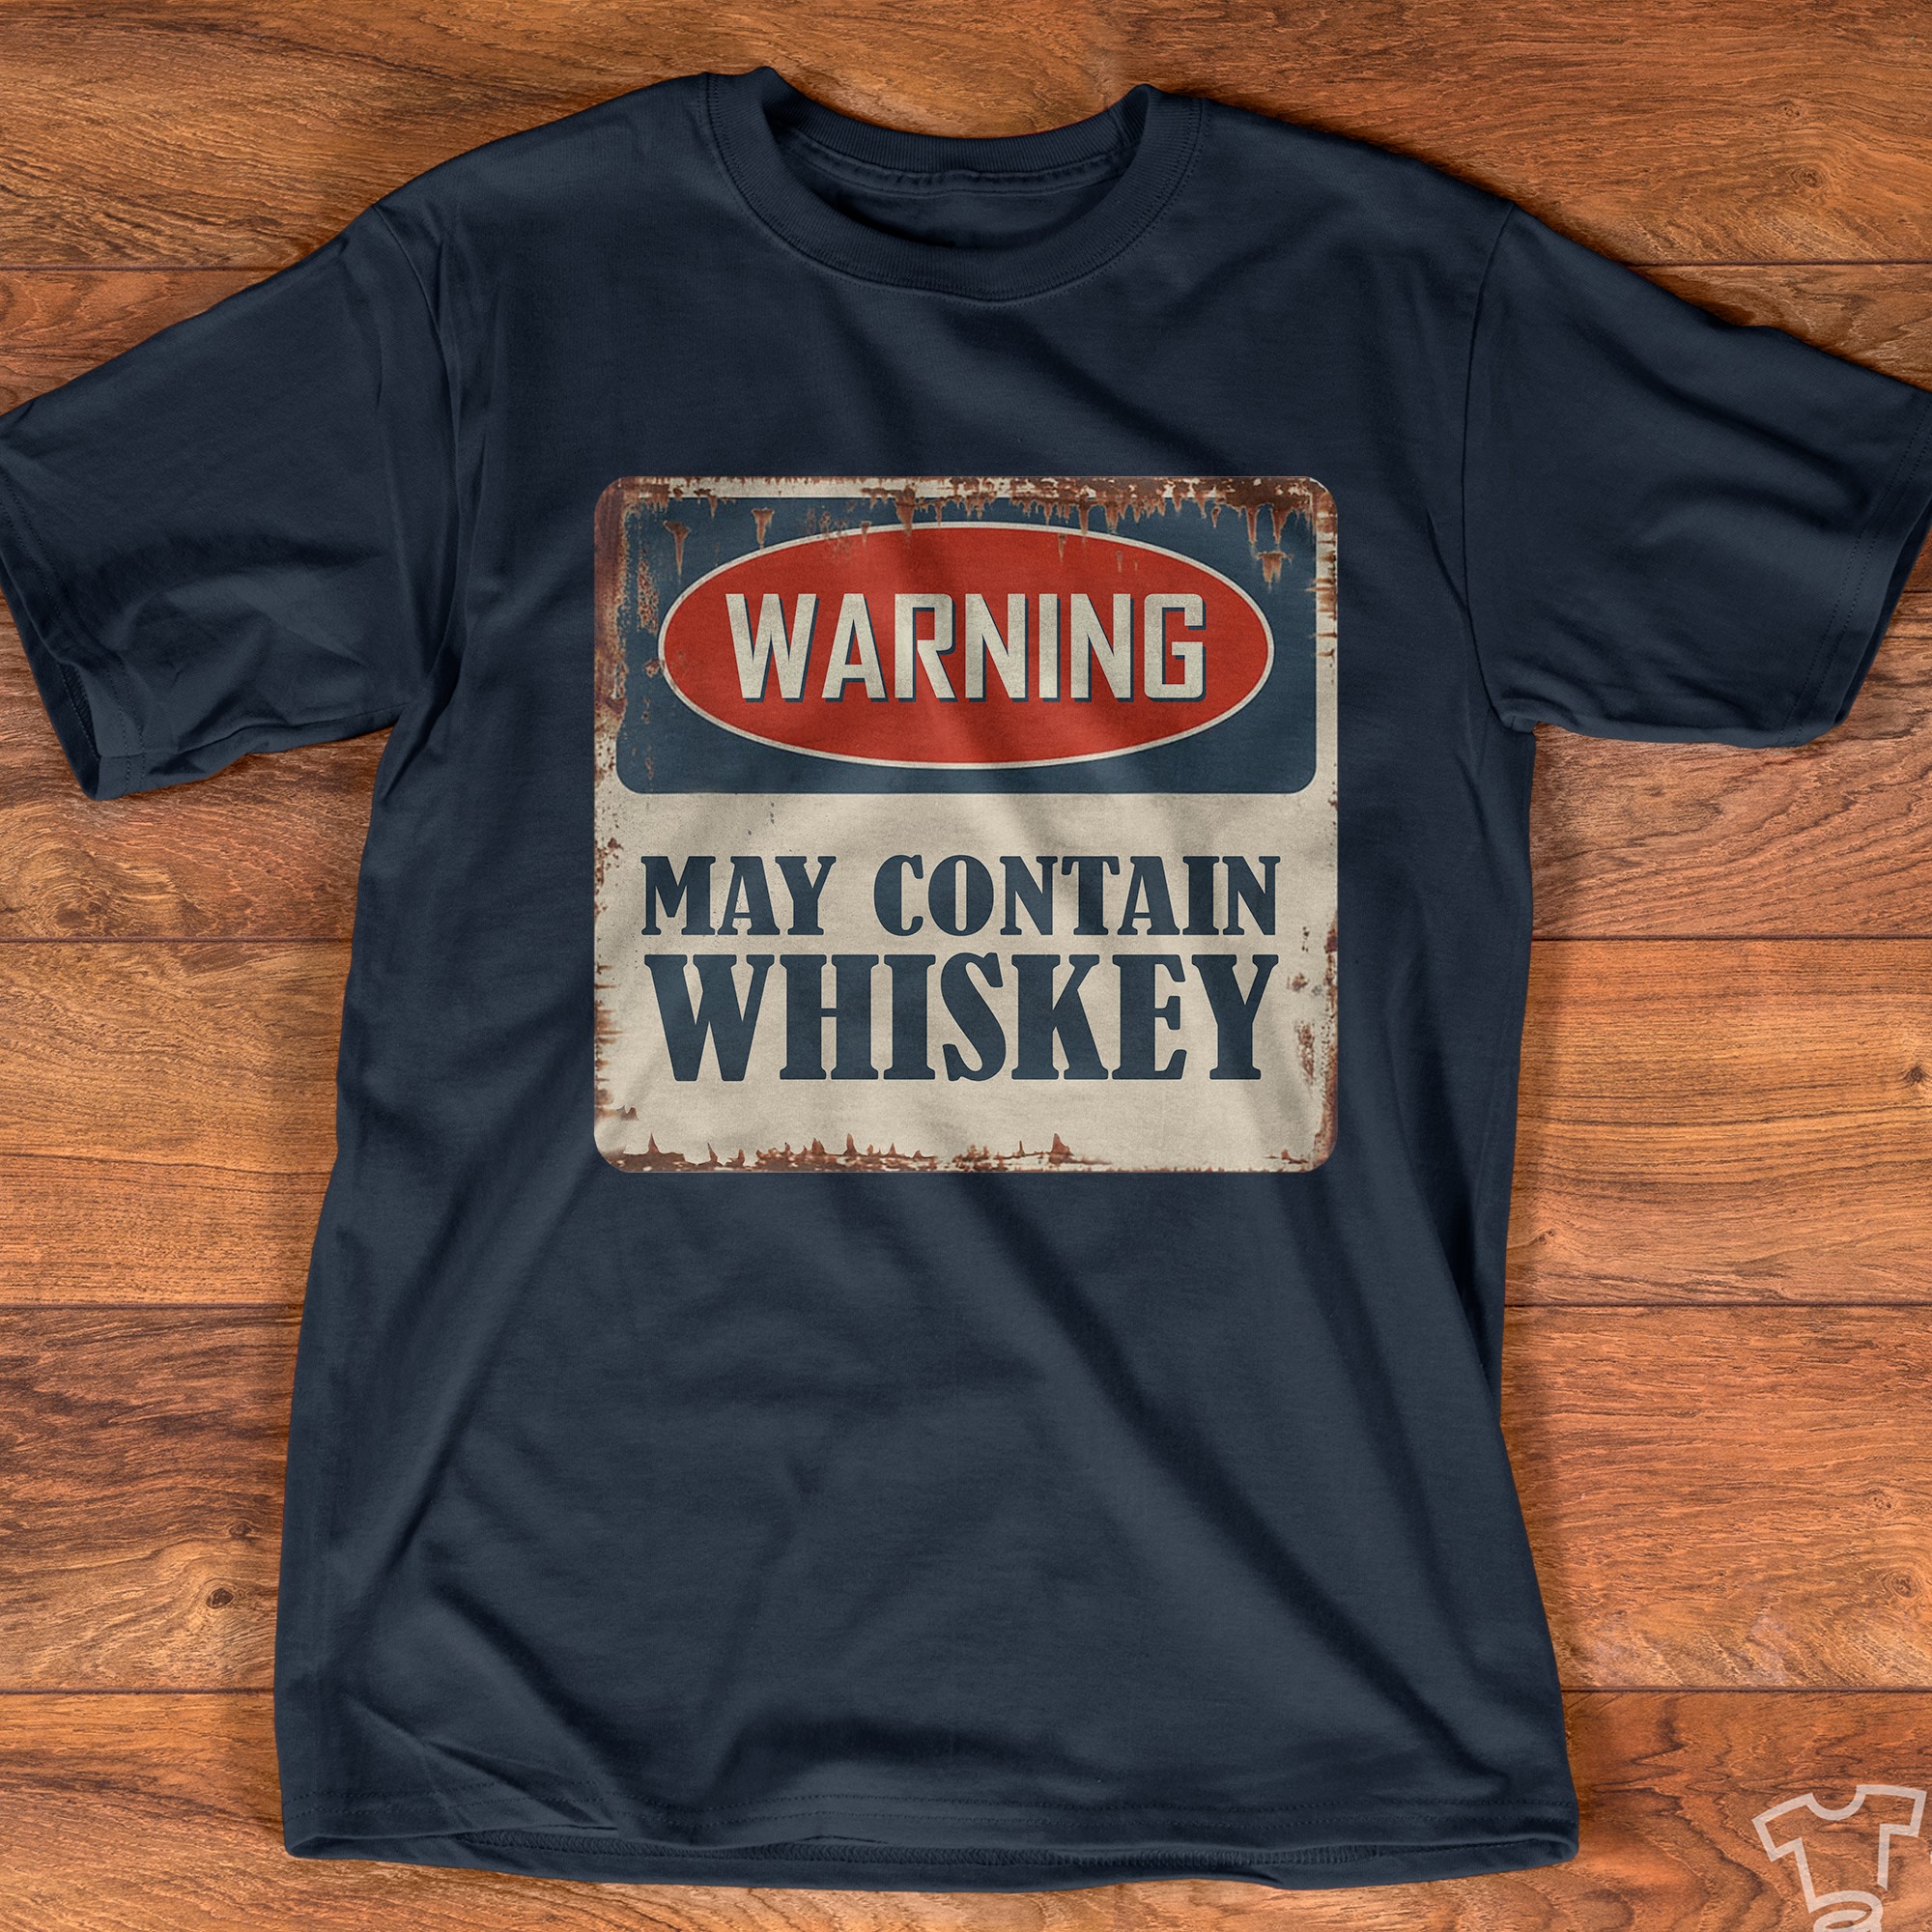 Warning may contain whiskey - Whiskey wine lover